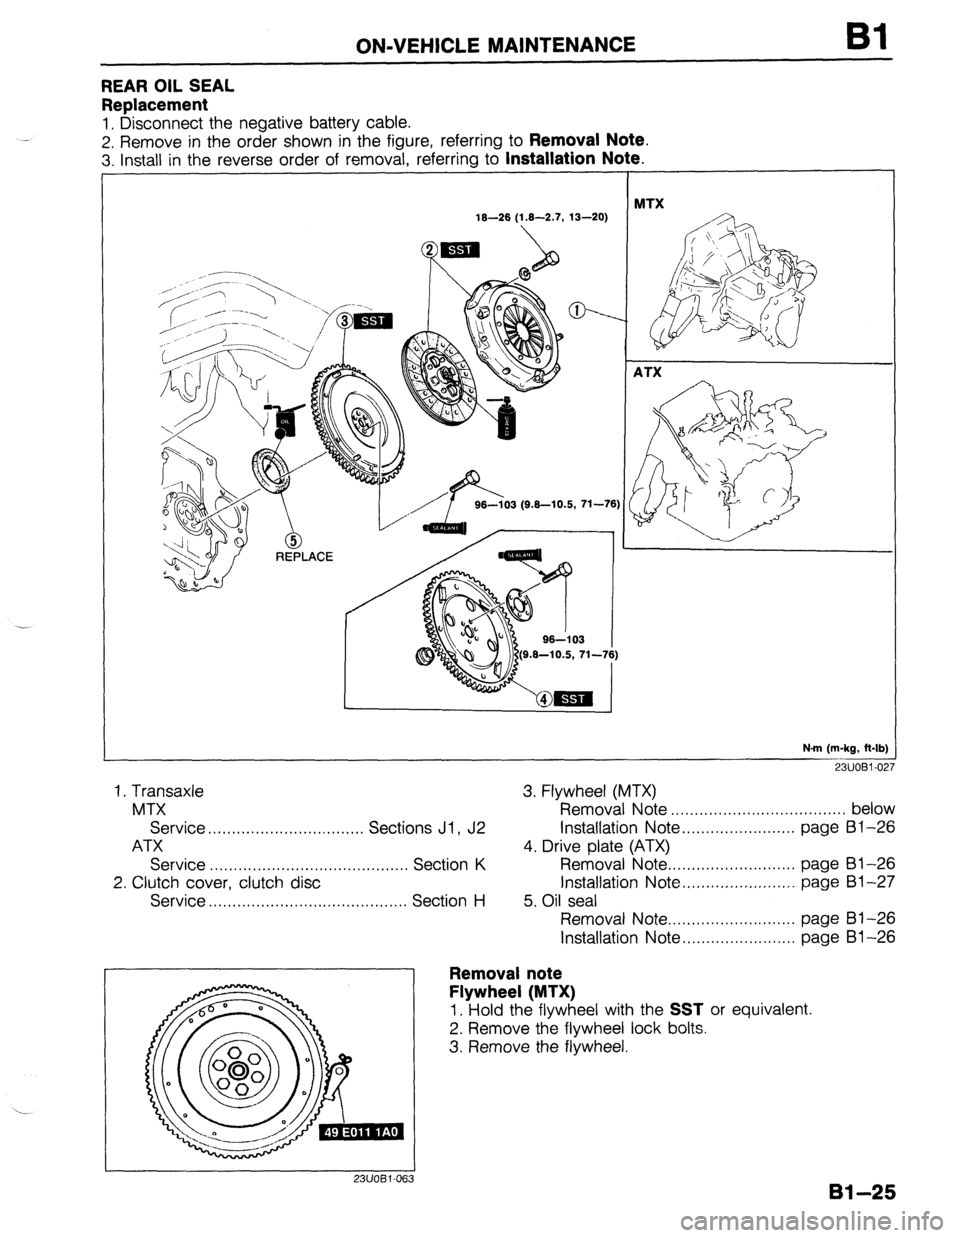 MAZDA 323 1989  Factory Repair Manual -. 
ON-VEHICLE MAINTENANCE Bl 
REAR OIL SEAL 
Replacement 
1. Disconnect the negative battery cable. 
2. Remove in the order shown in the figure, referring to 
Removal Note. 
3. install in the reverse